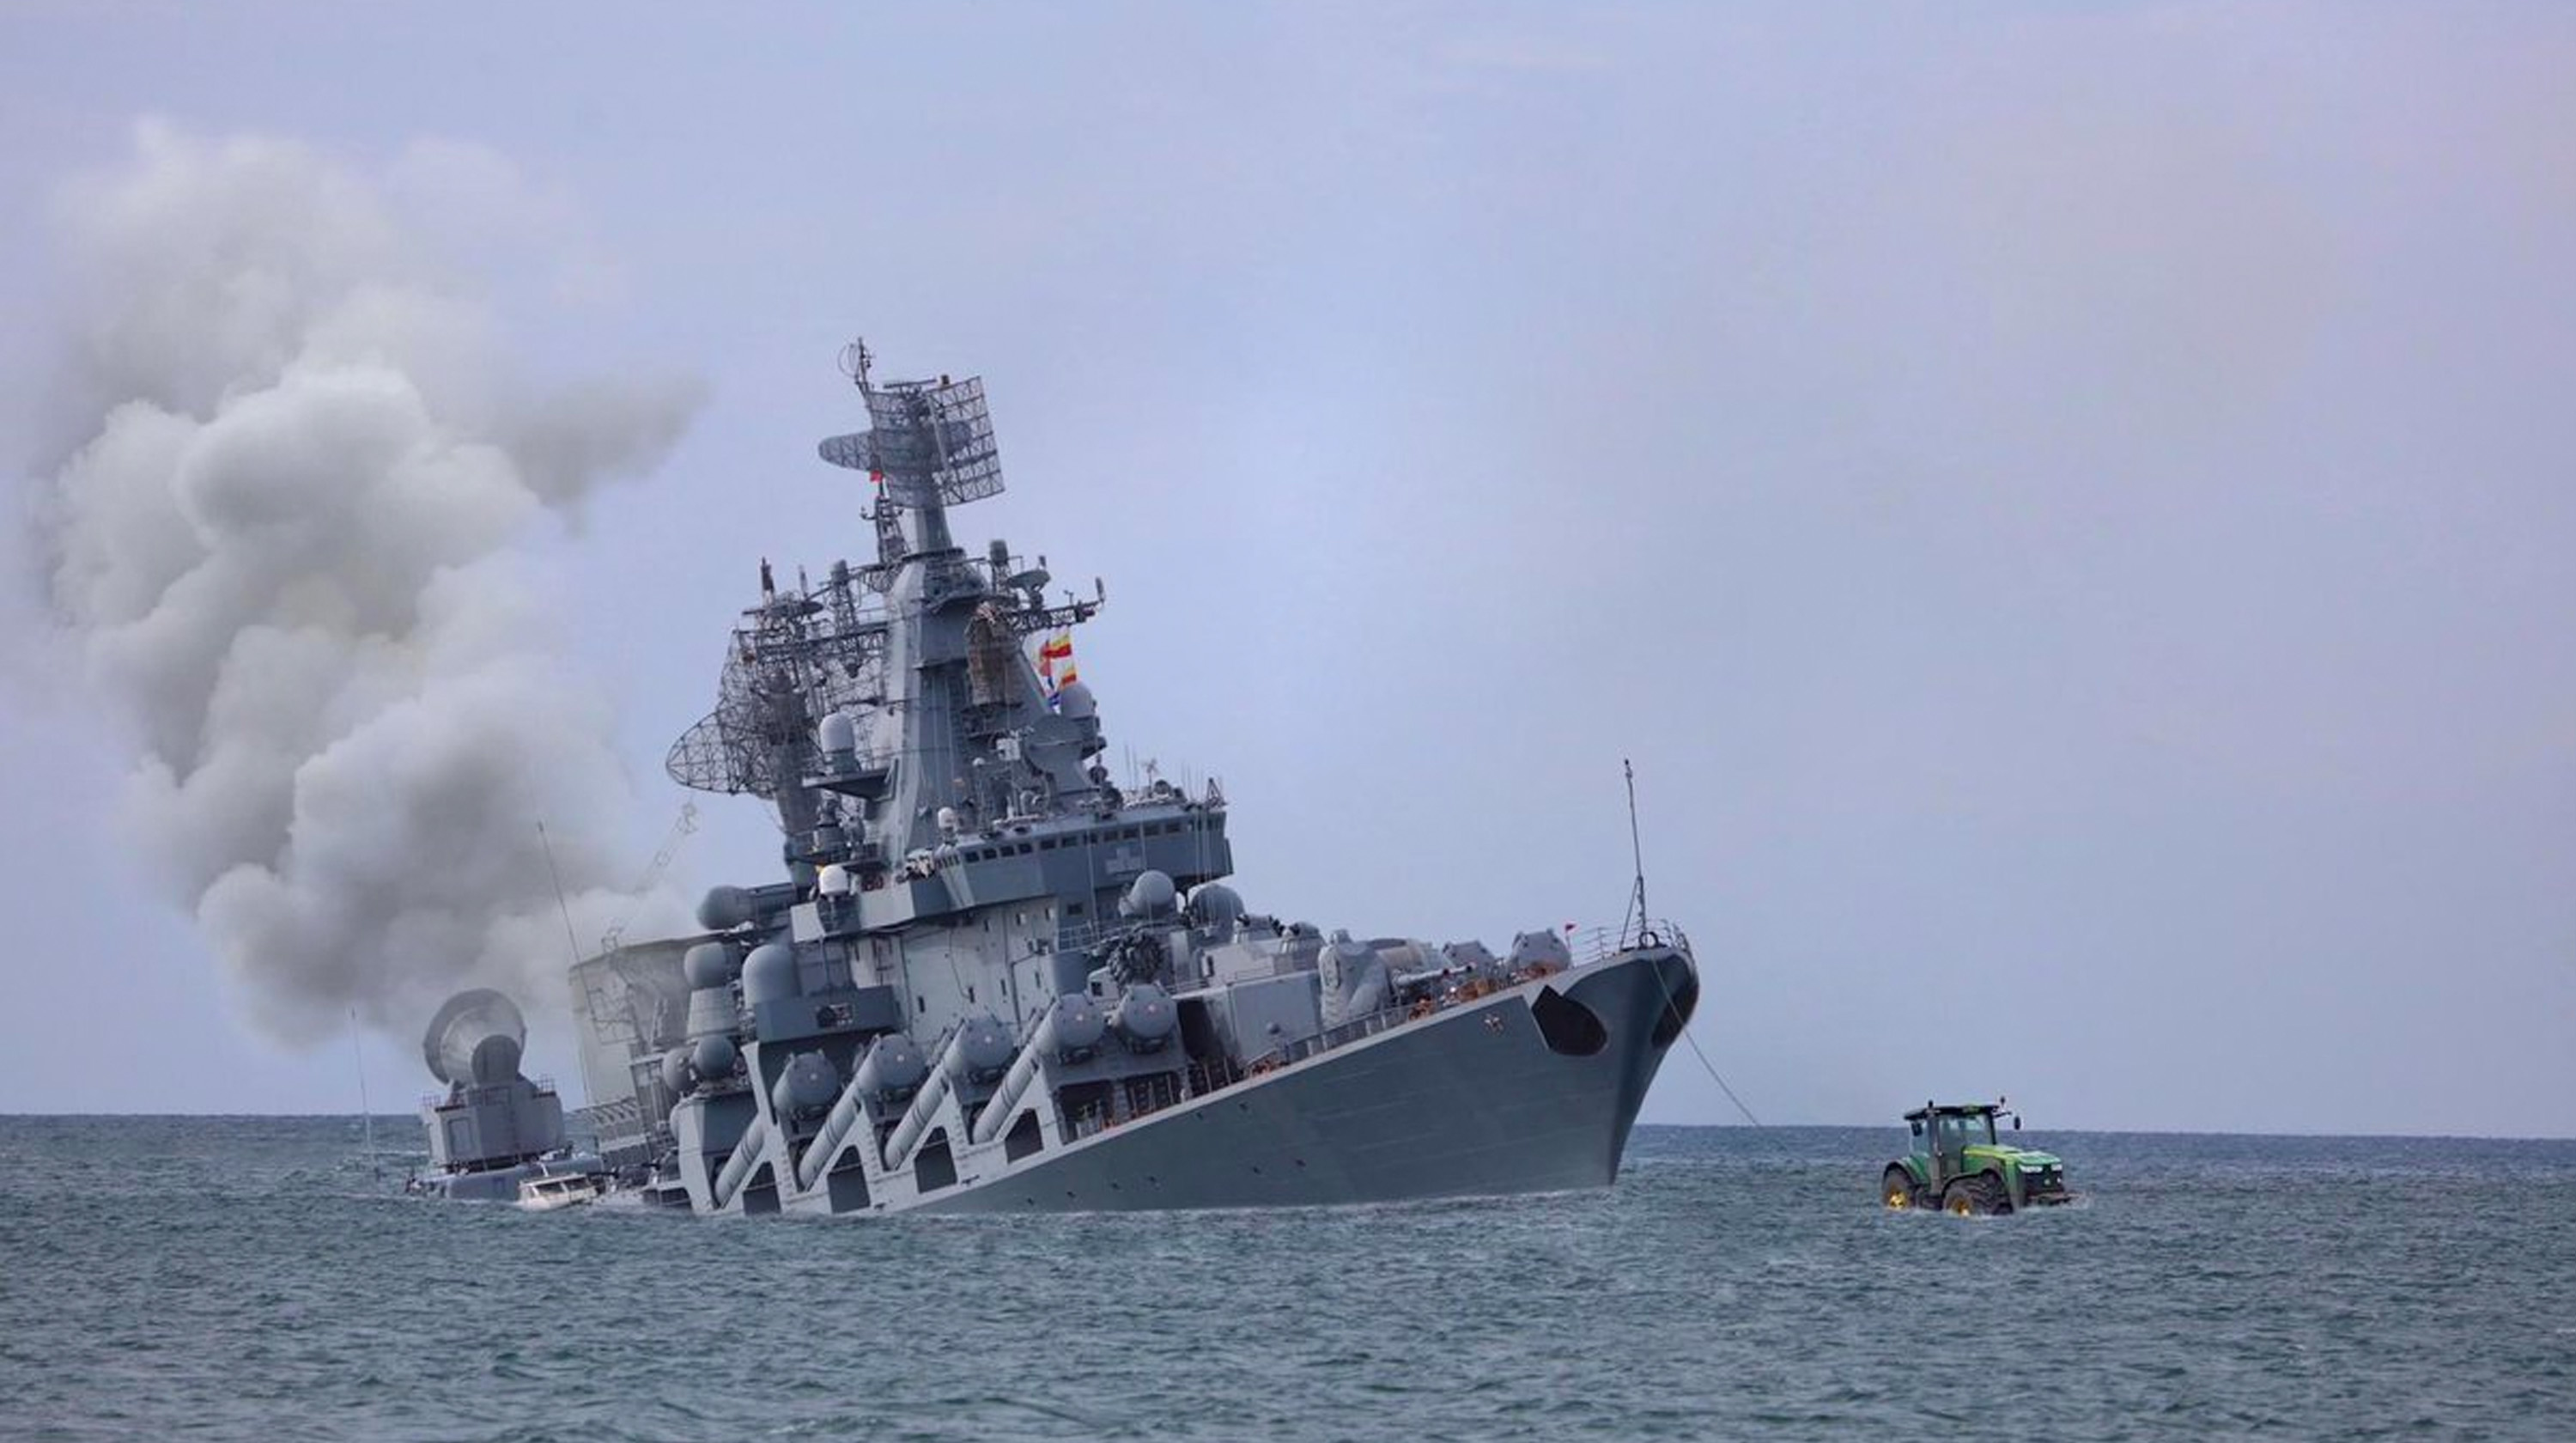 Ukraine claims sinking another Russian ship in Black Sea